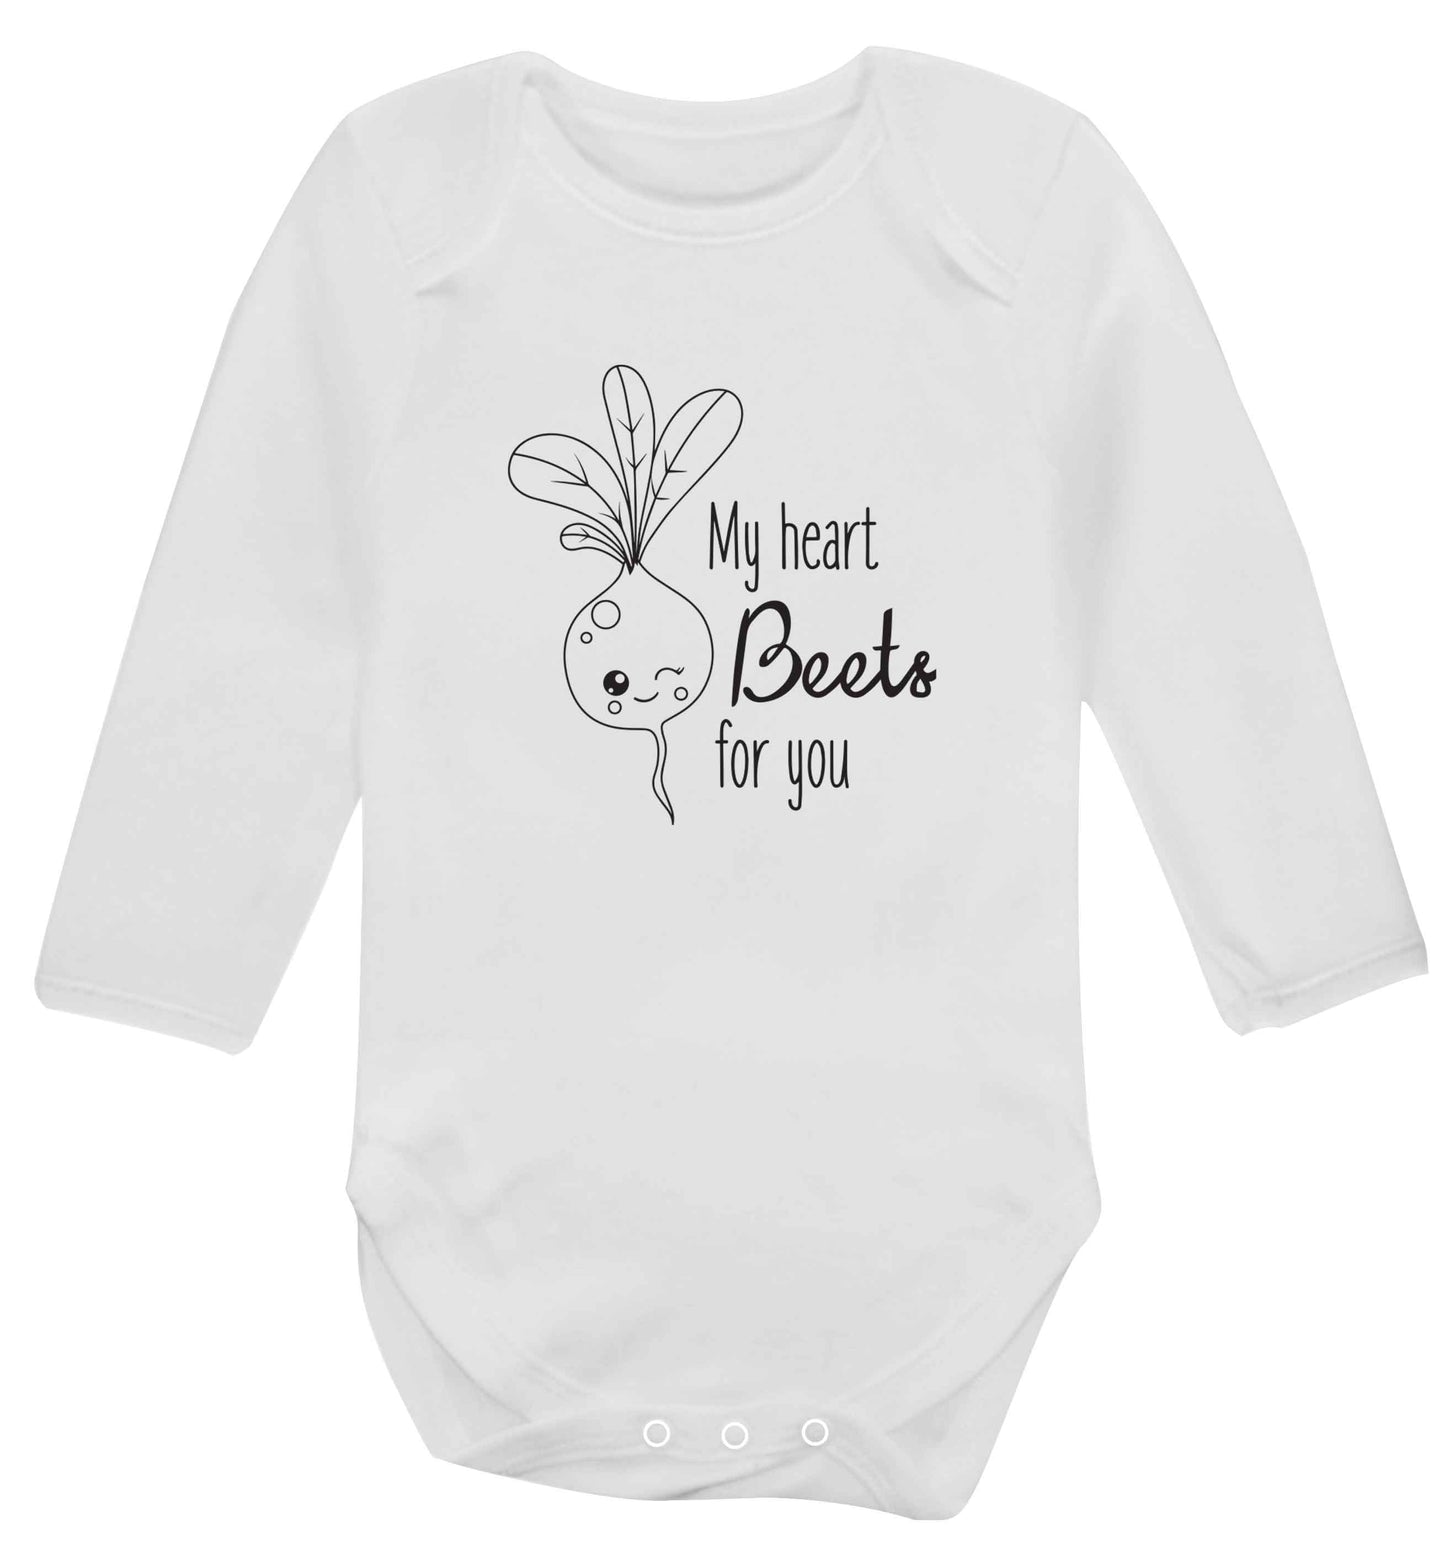 My heart beets for you baby vest long sleeved white 6-12 months